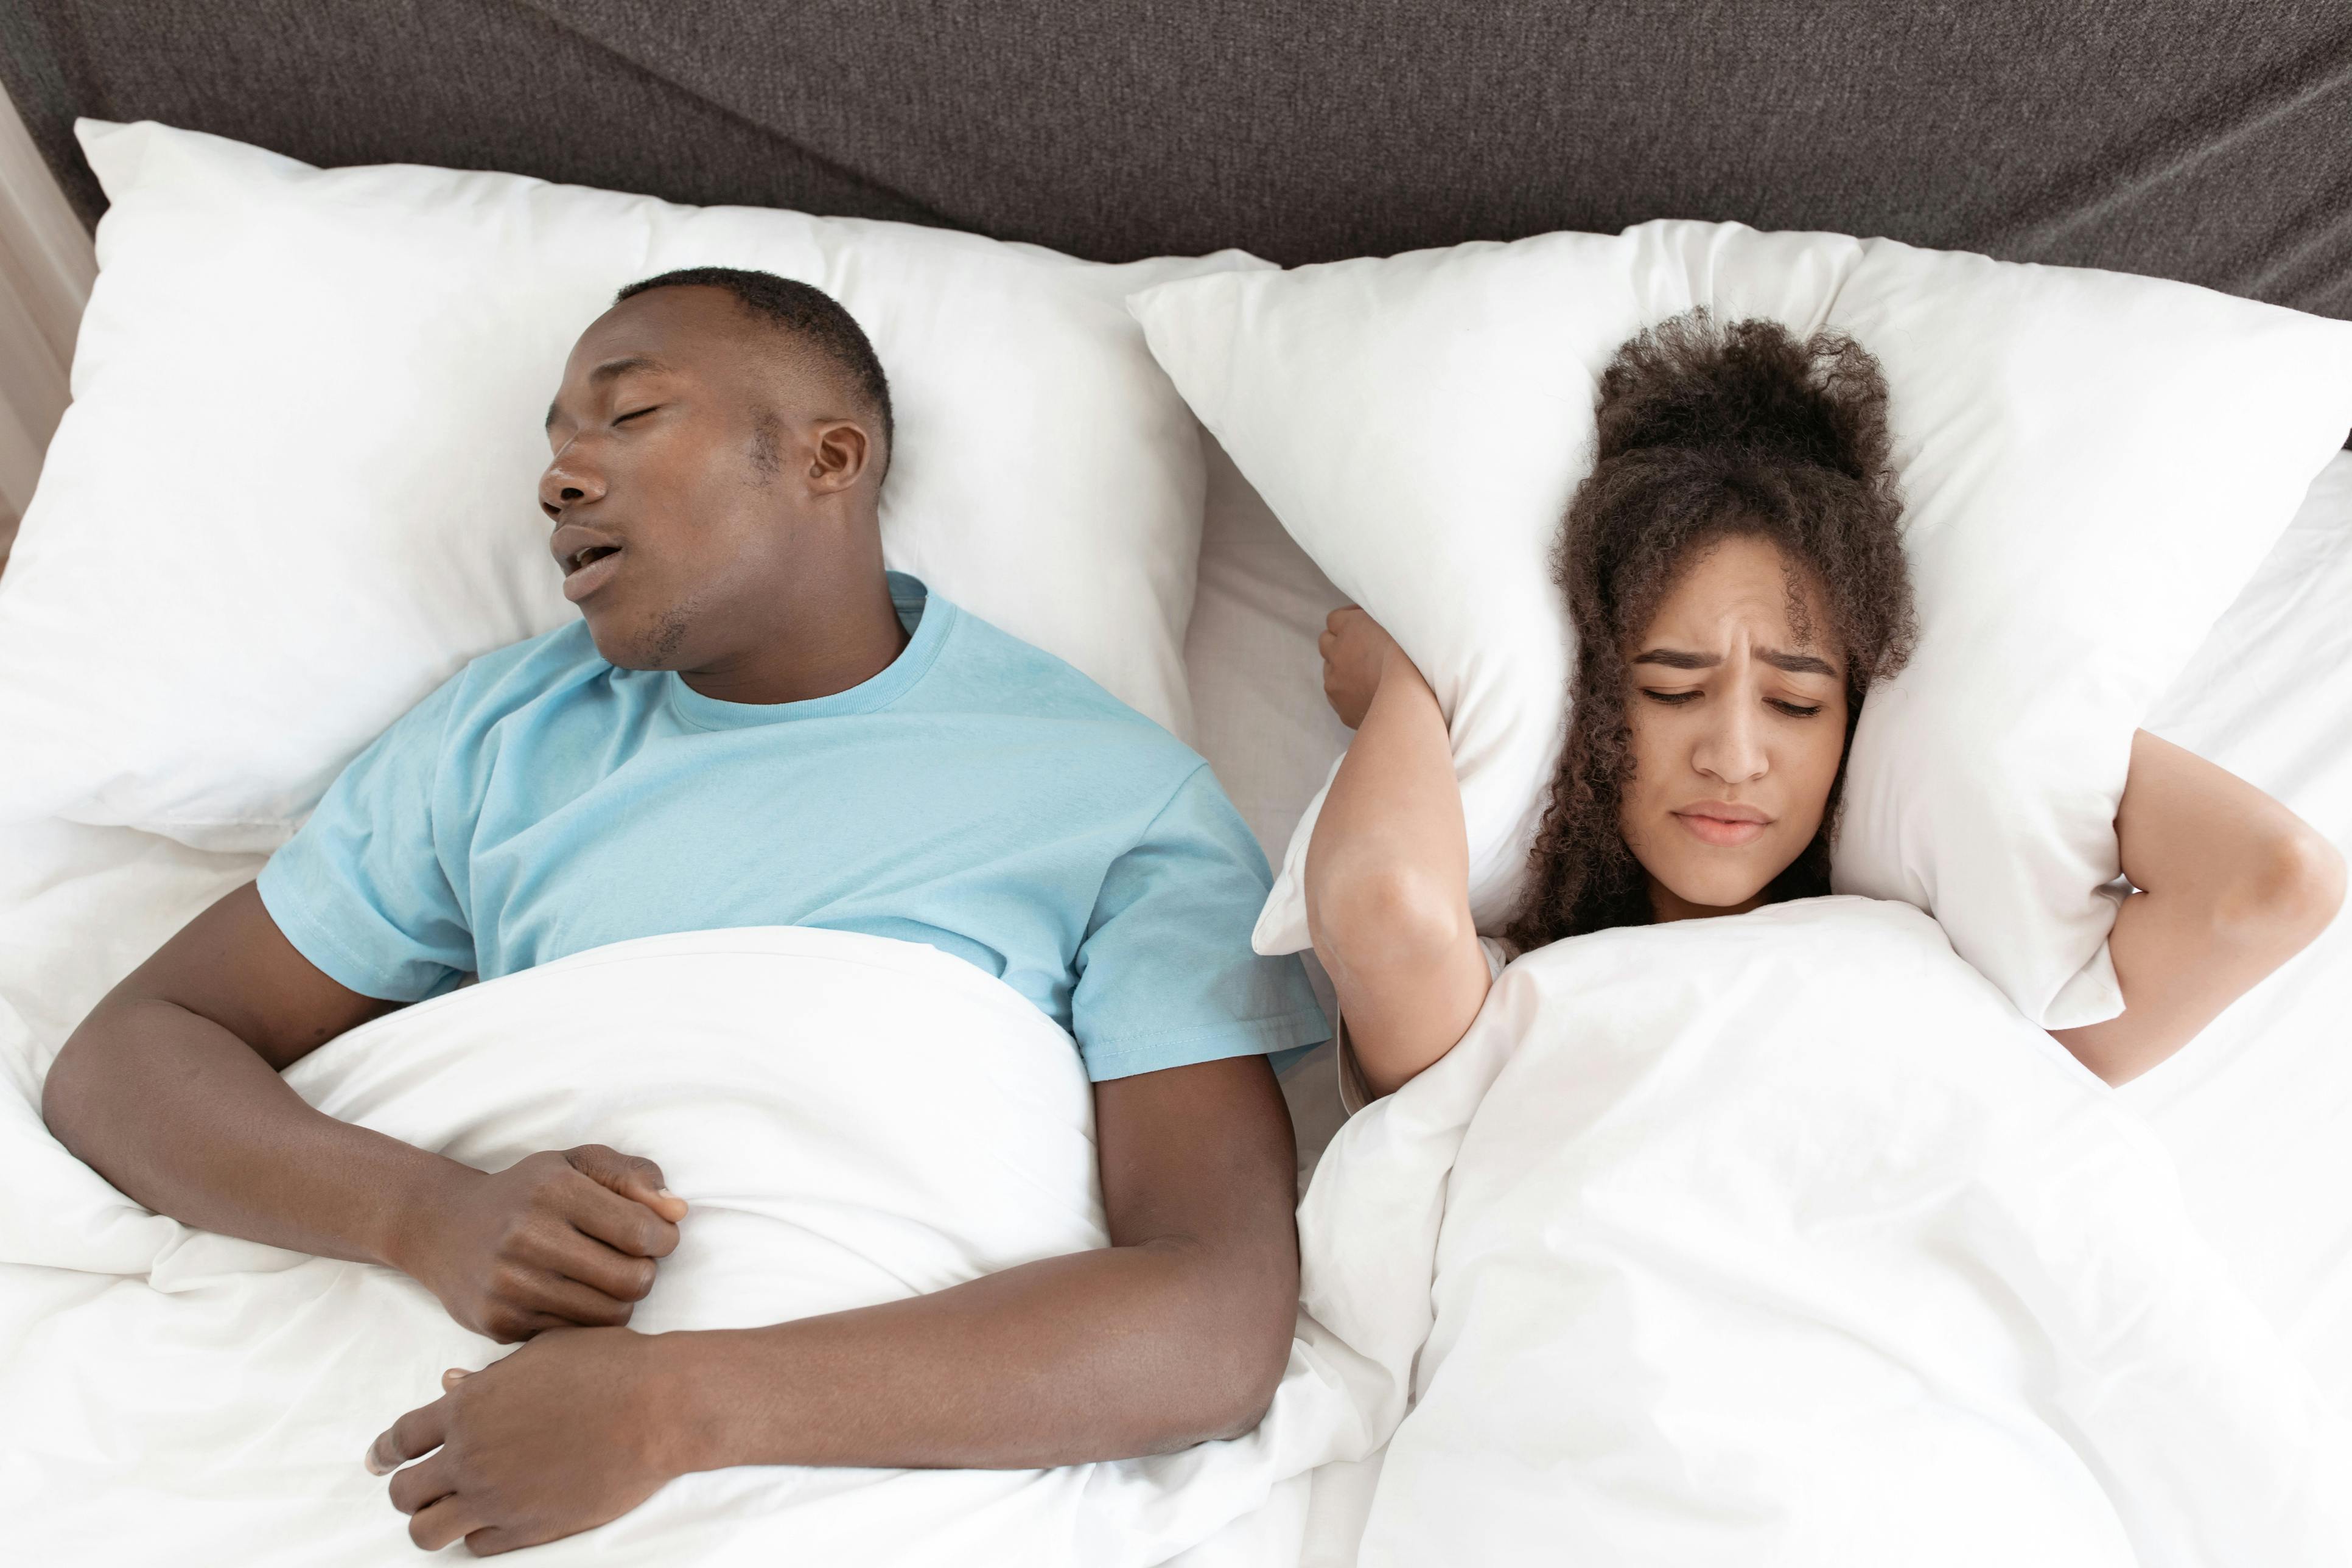 Man snoring in bed with woman